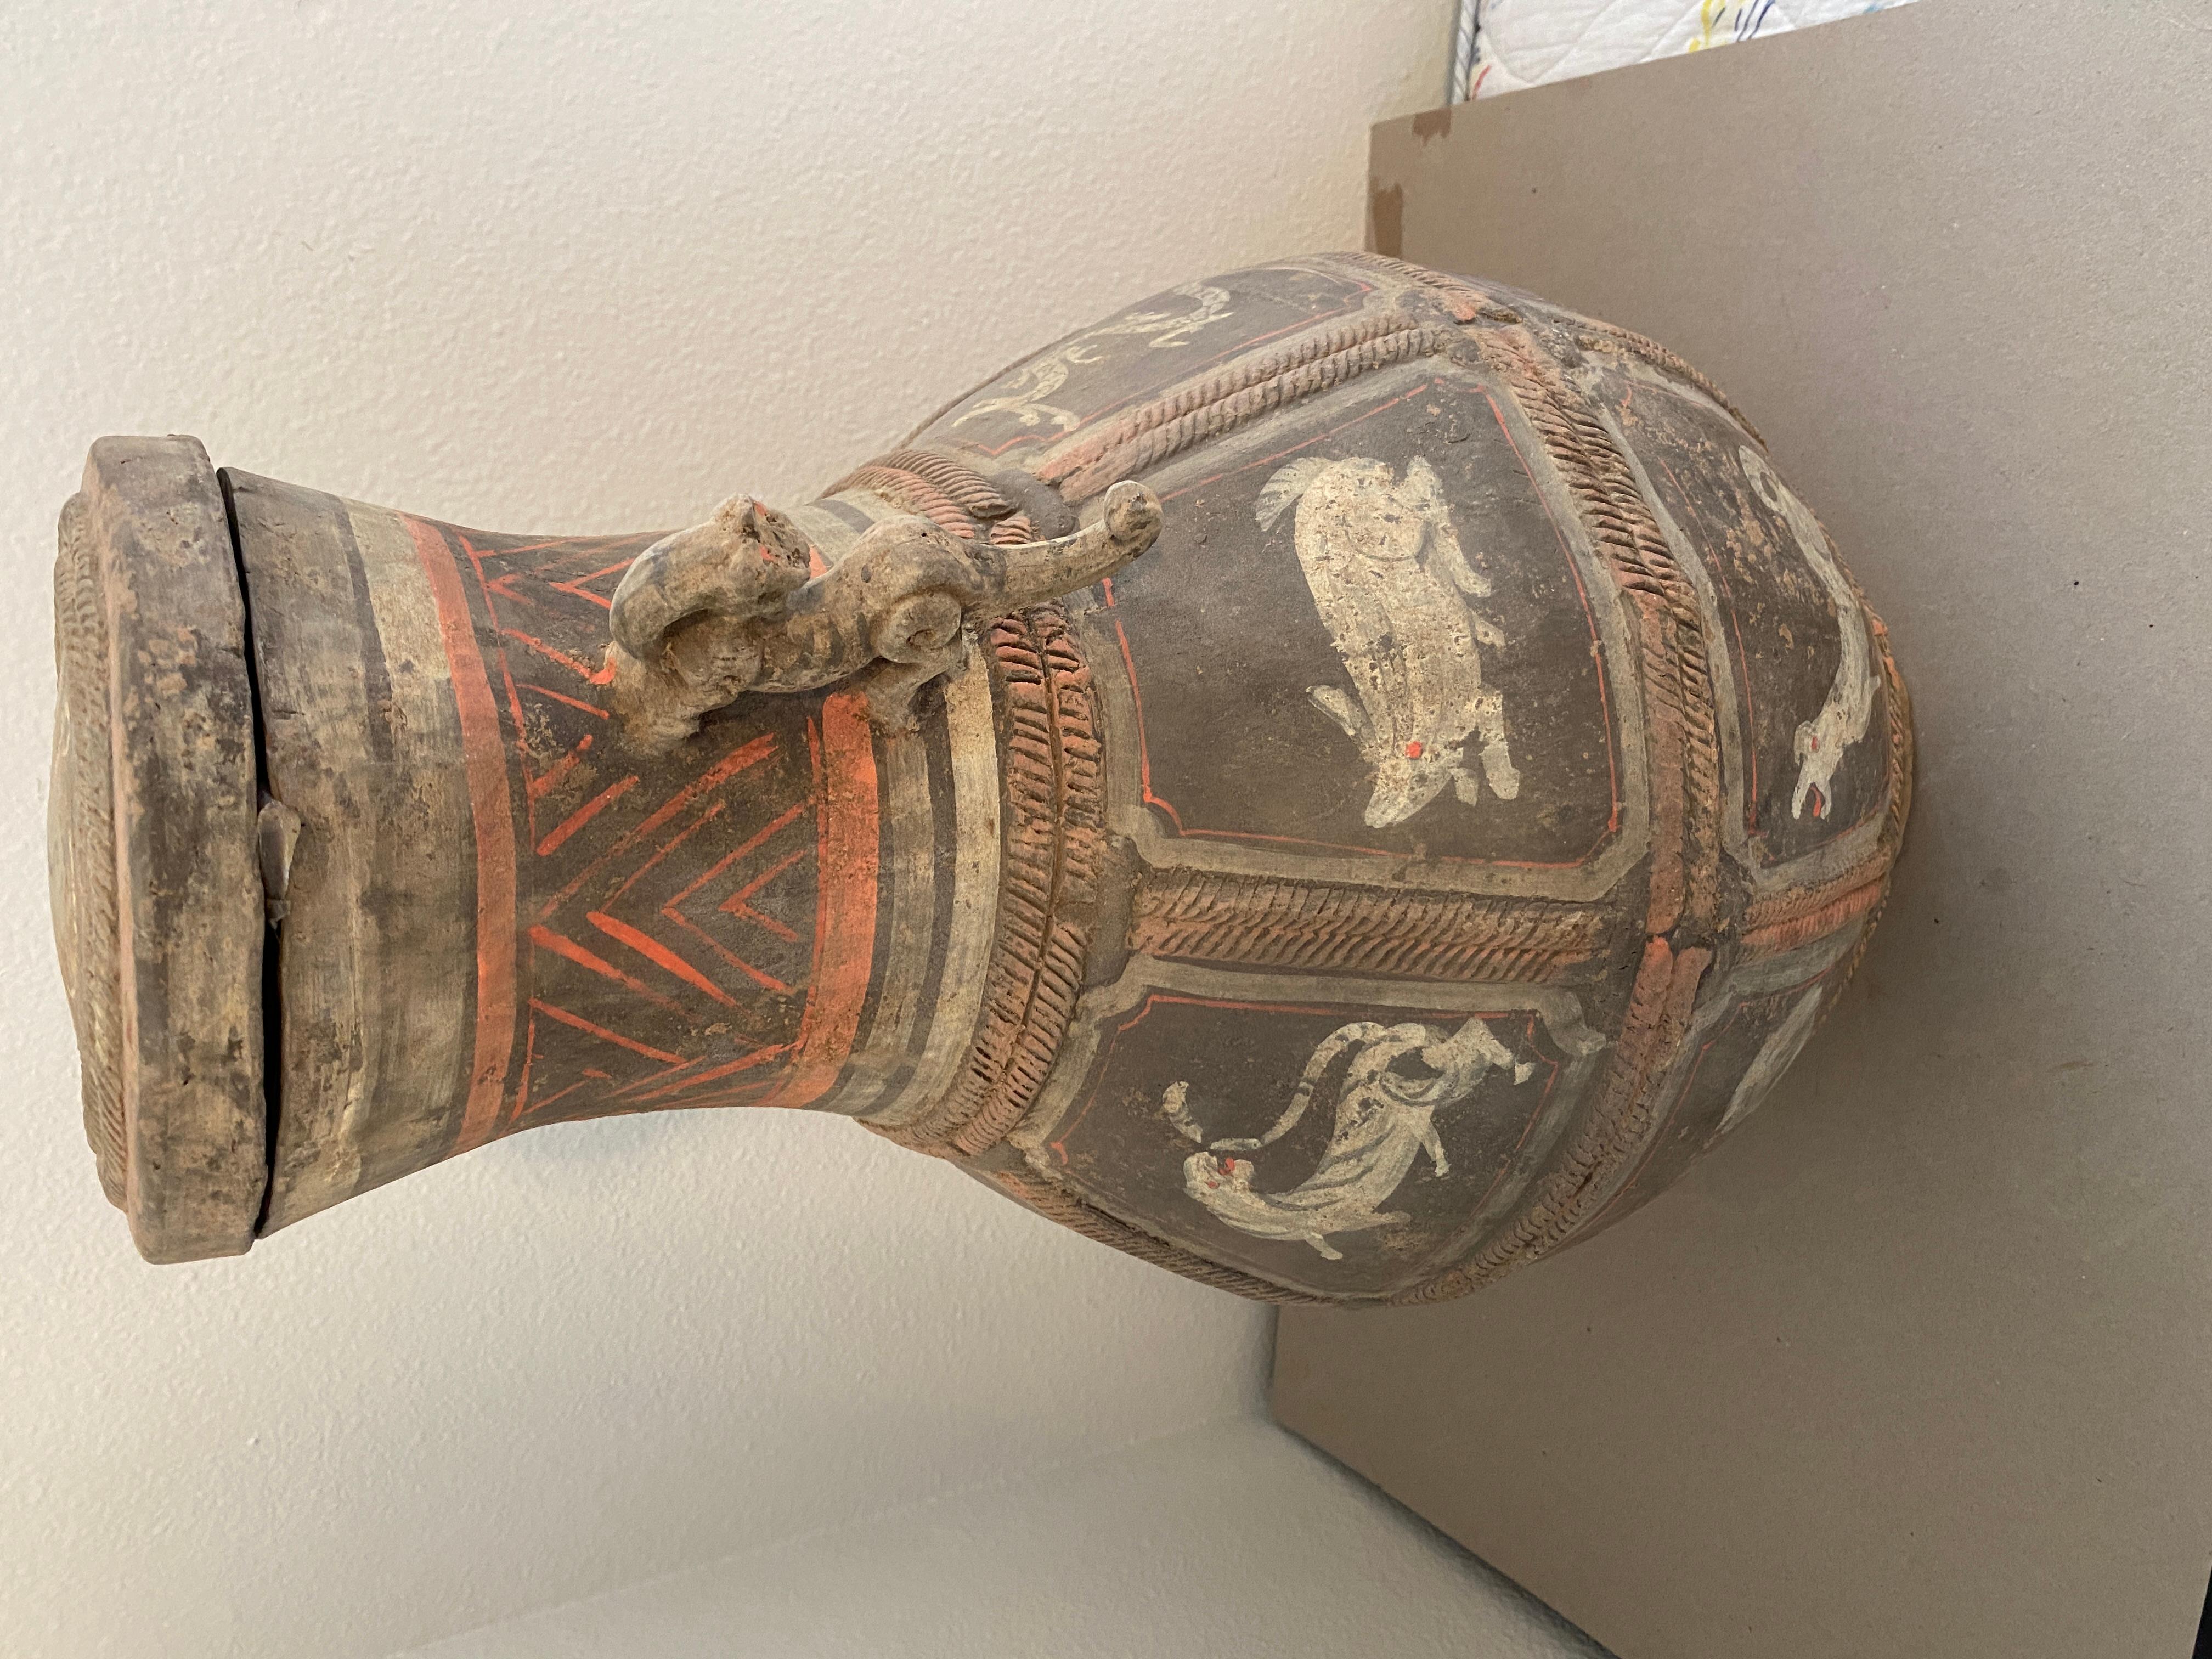 This Ahou Dynasty Funeral Vase will be a valuable addition to your collection.  It features delicately painted  animal characters and tiger handles.  It has a distinct look of antiquity.